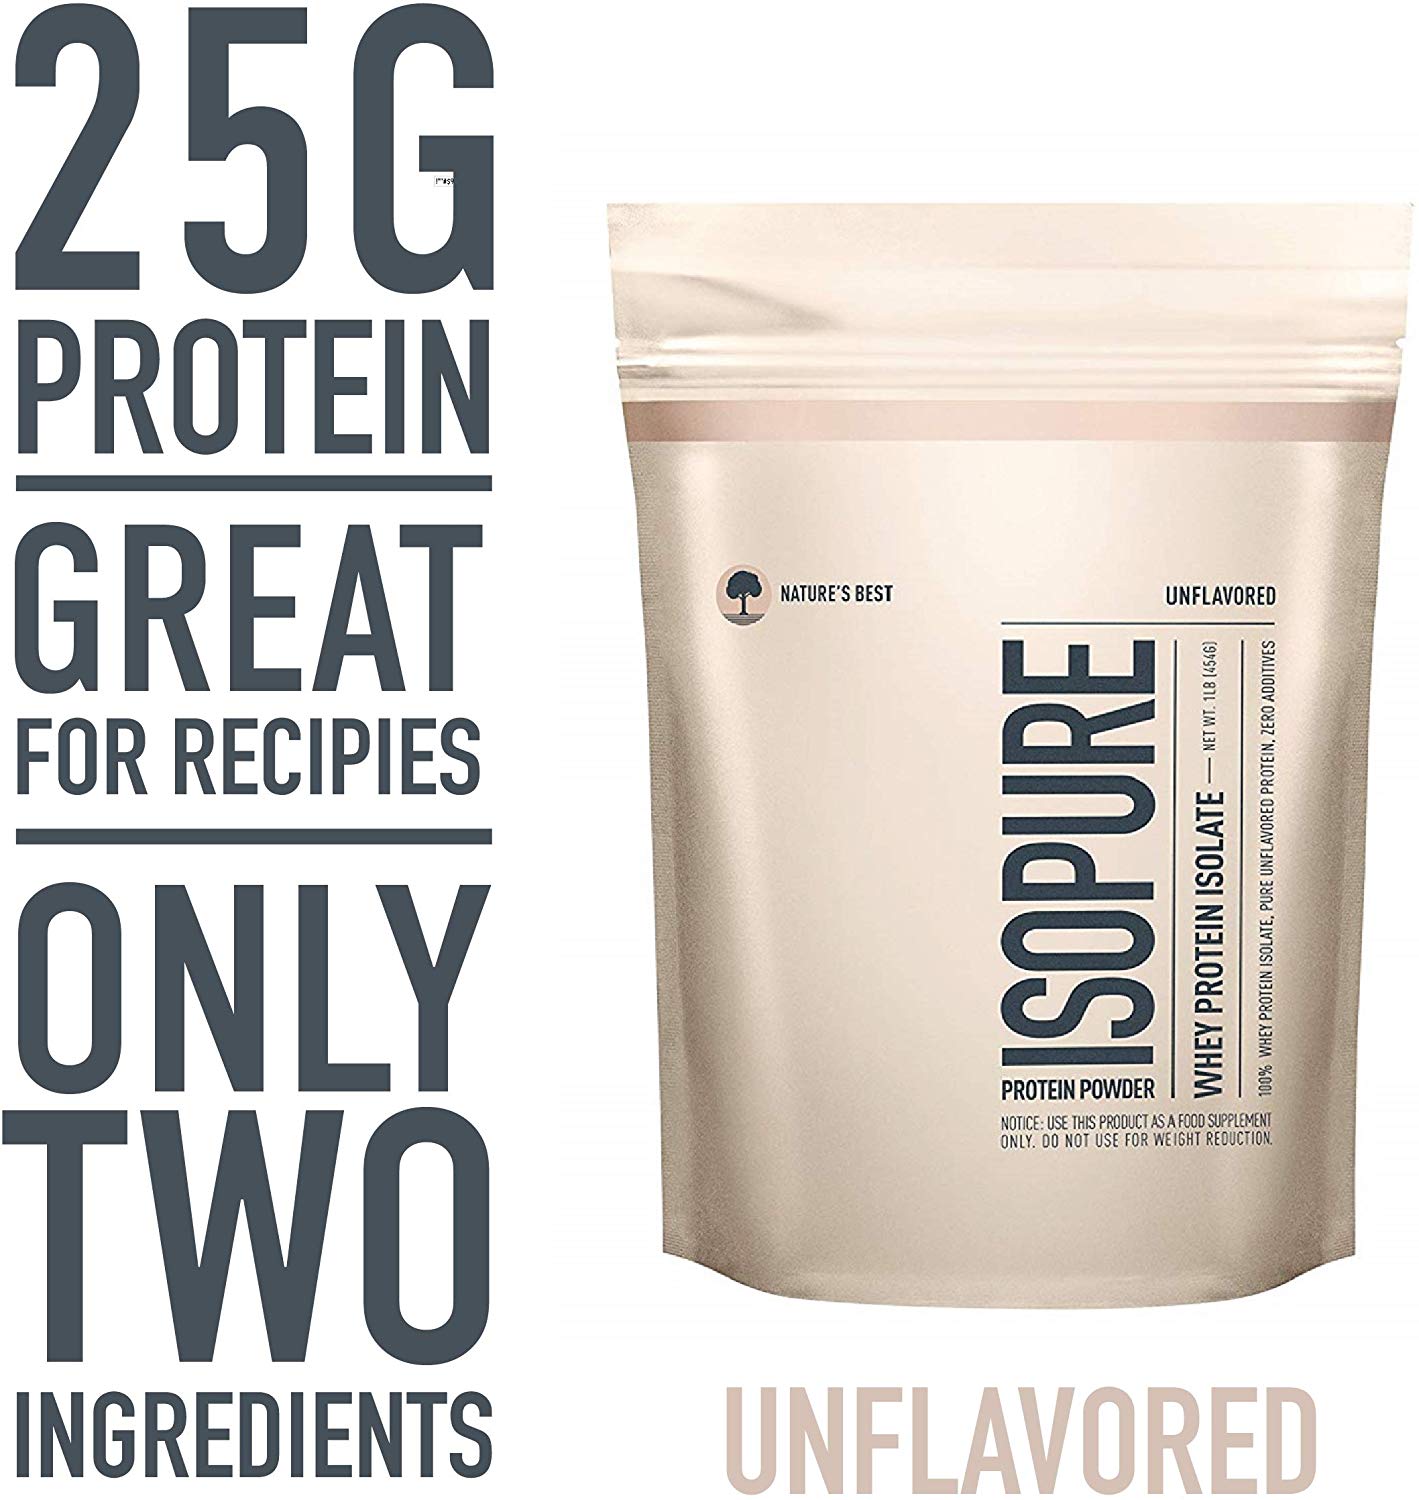 LIMITED TIME DEAL!!! Isopure Zero Carb, Keto Friendly Protein Powder $9.79 (REG $21.99)